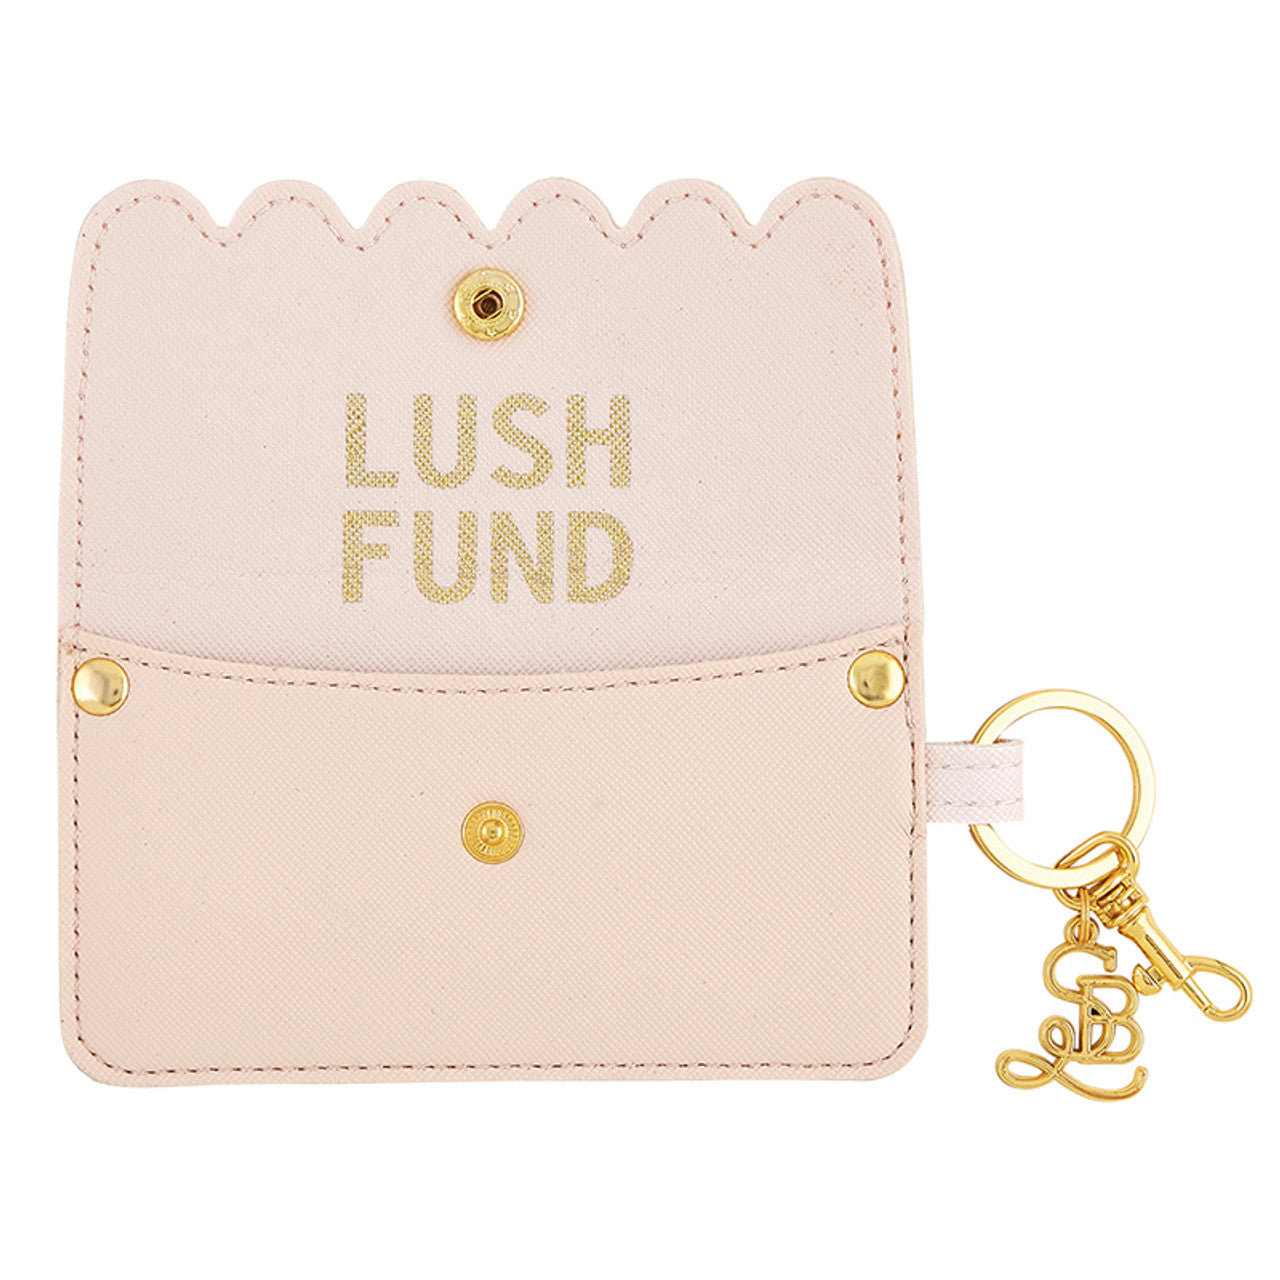 Credit Card Pouch - Lush Fund